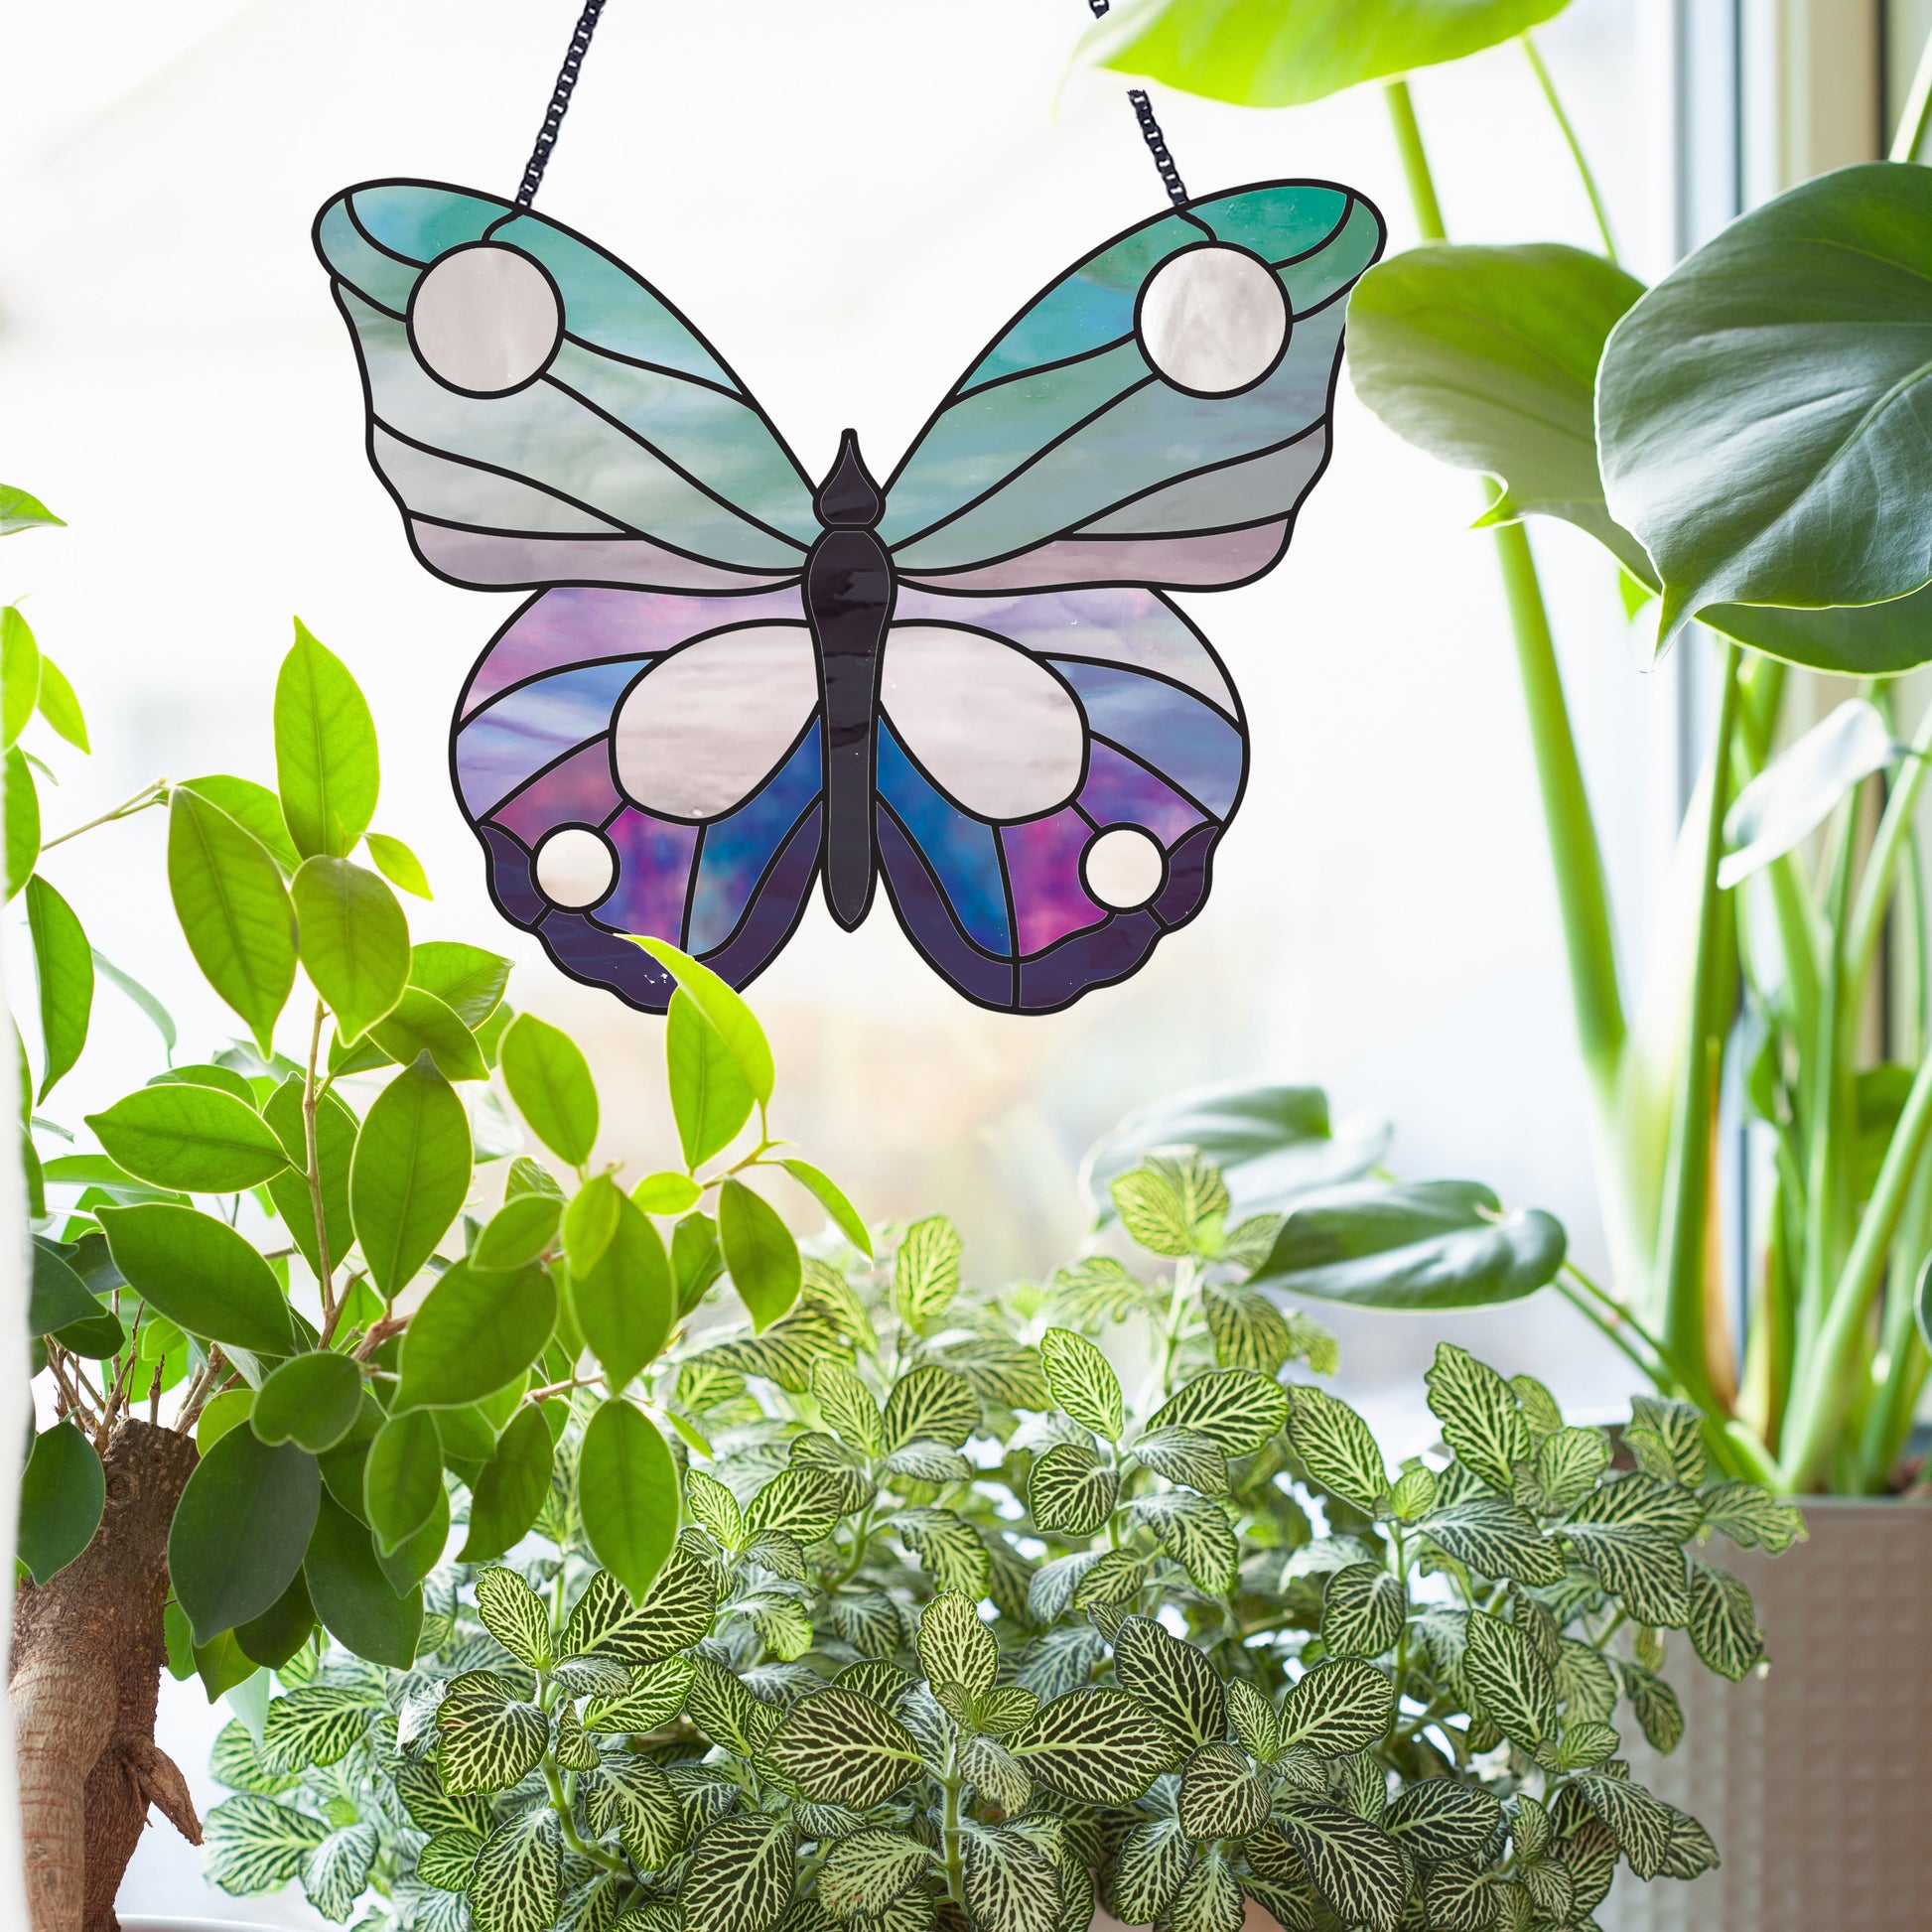 Butterfly stained glass pattern, instant PDF download, shown in bright window with plants